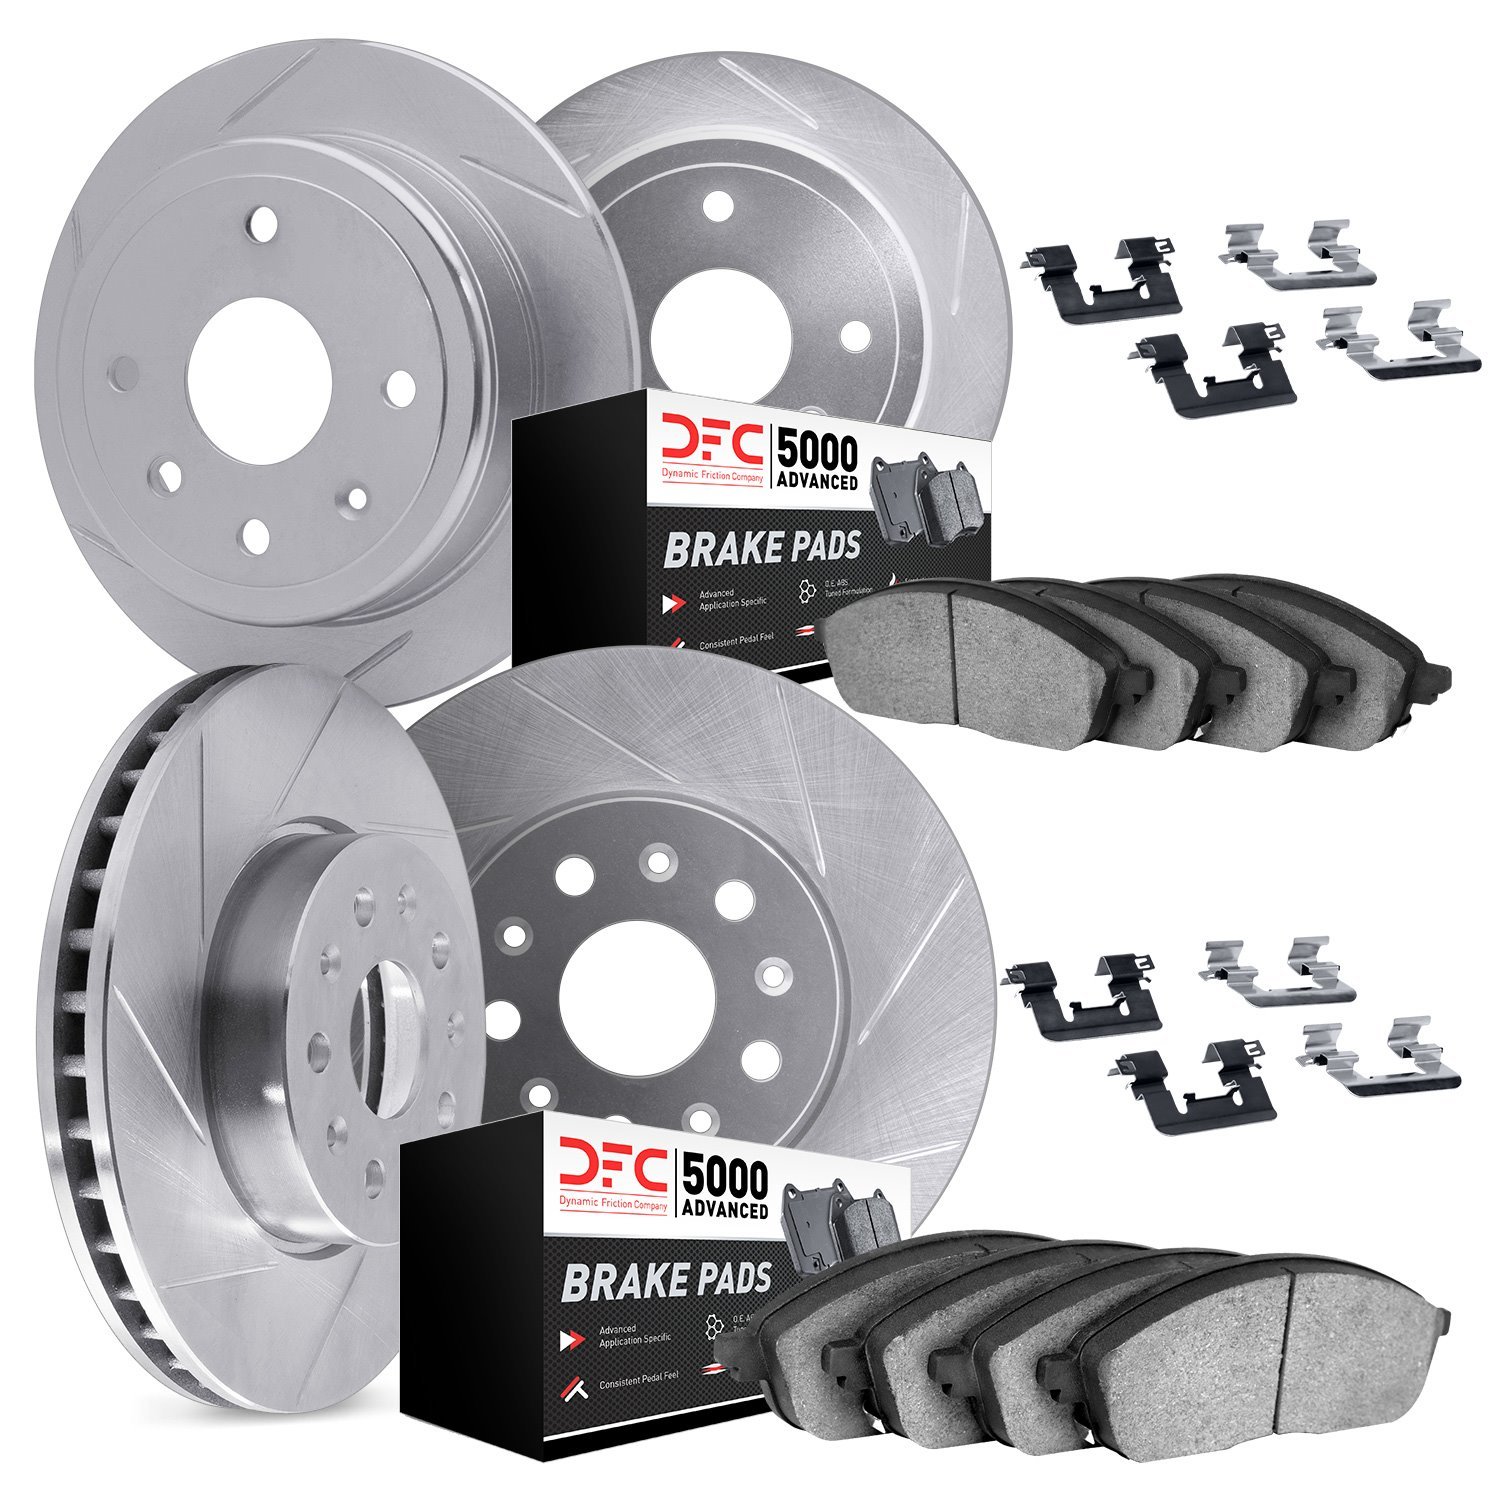 5514-42010 Slotted Brake Rotors w/5000 Advanced Brake Pads Kit & Hardware [Silver], 2007-2012 Mopar, Position: Front and Rear